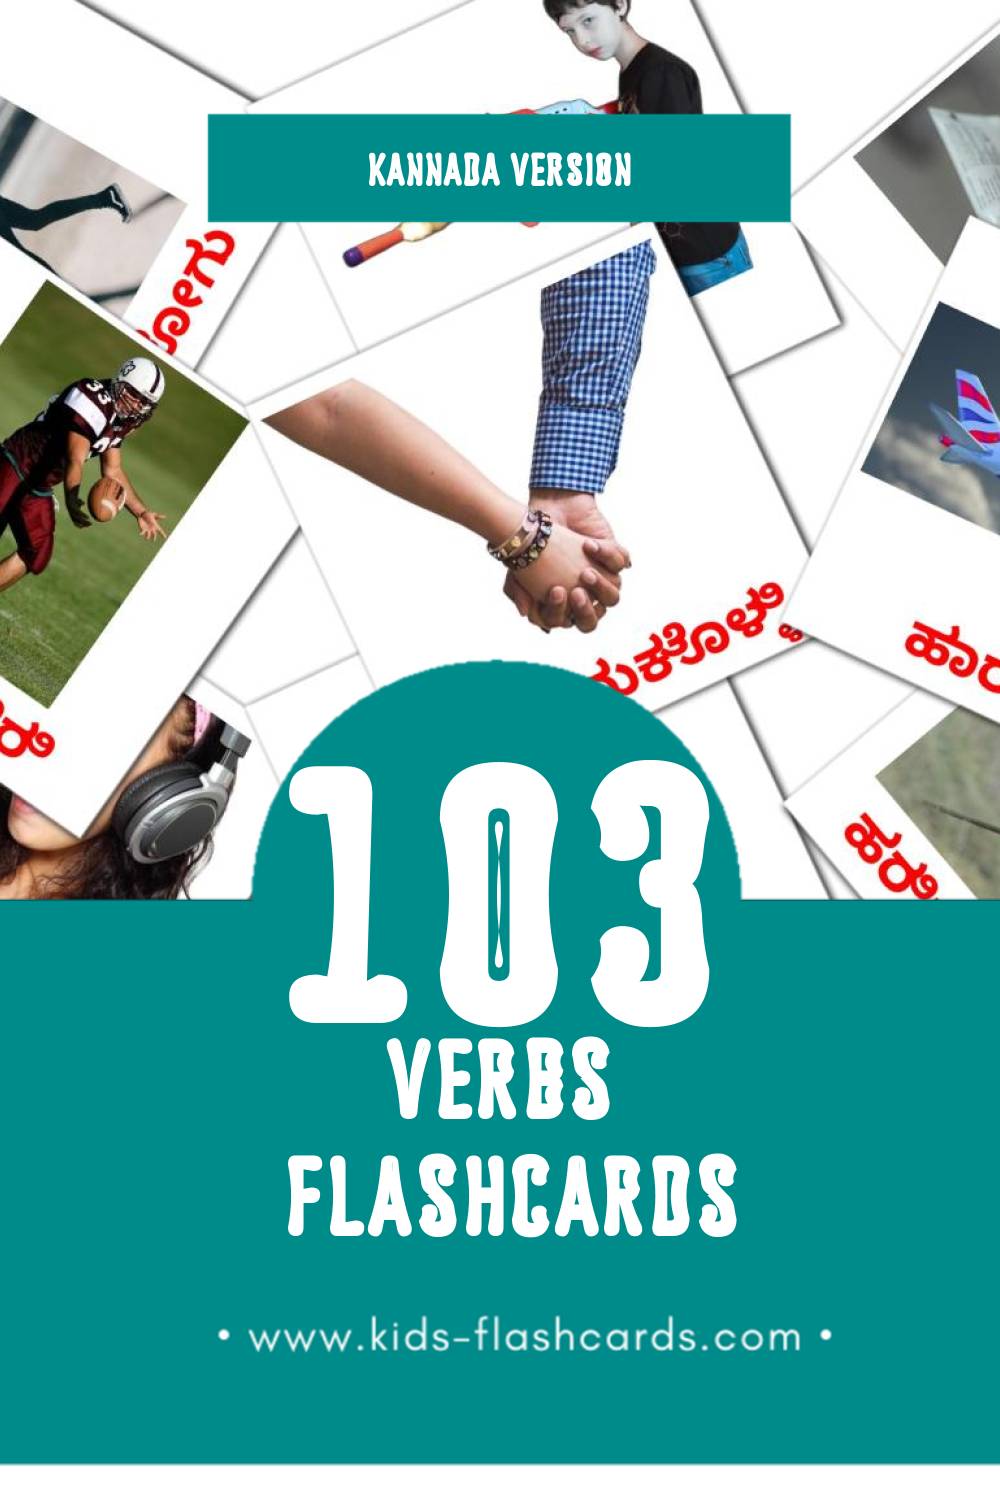 Visual ಕ್ರಿಯಾಪದಗಳು Flashcards for Toddlers (103 cards in Kannada)